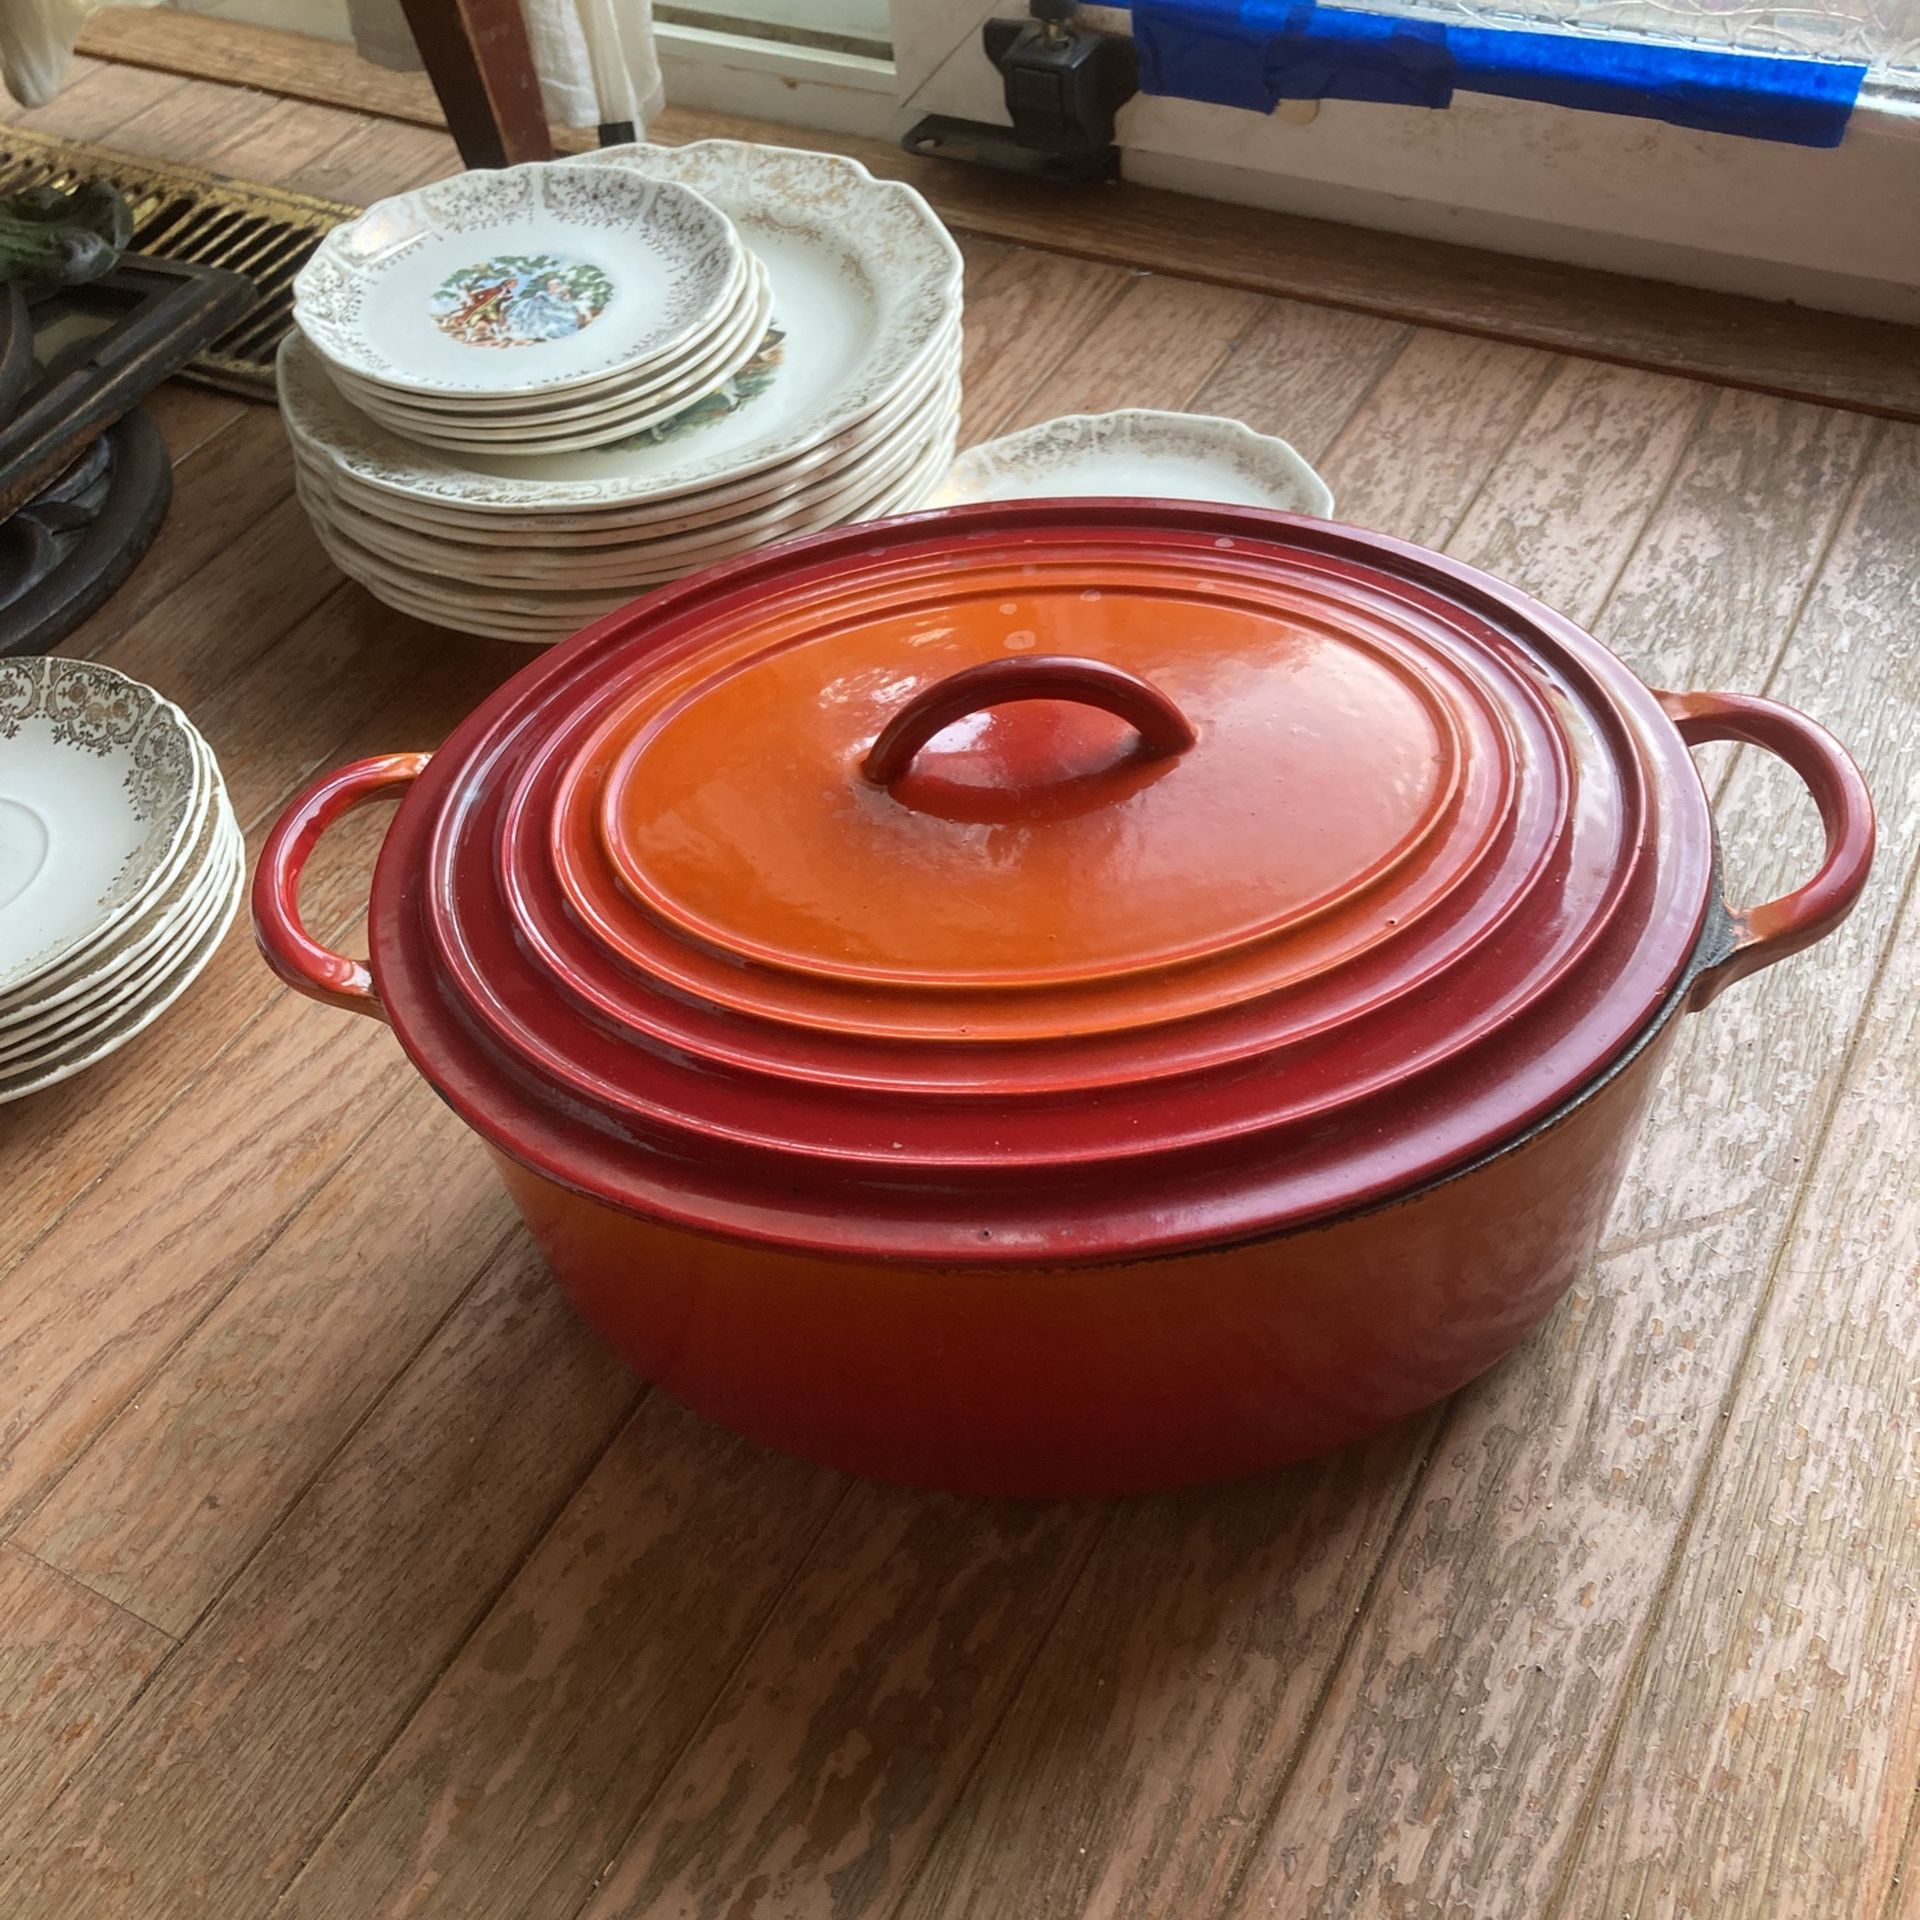 Vintage Le Creuset Dutch Oven Classic Red Orange Sale in Baltimore, MD OfferUp